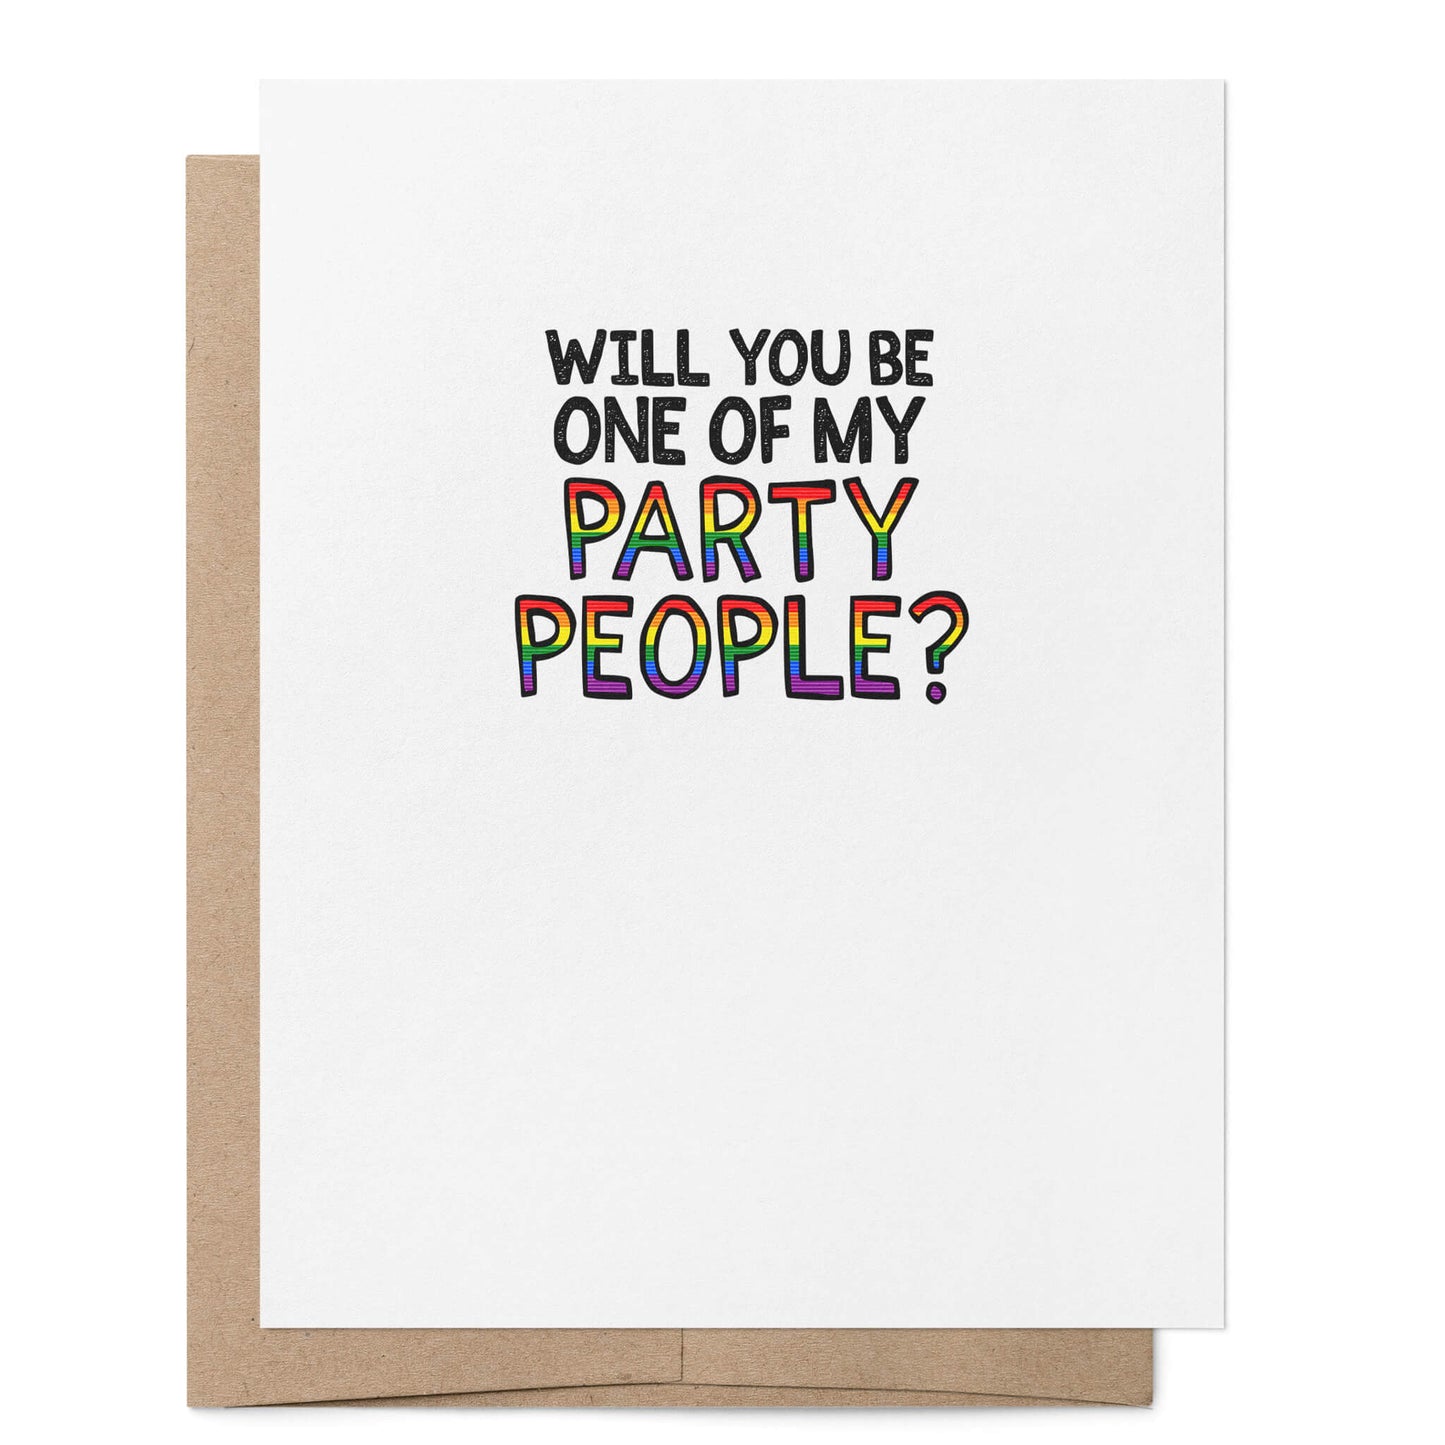 Will You Be One of My Party People Card